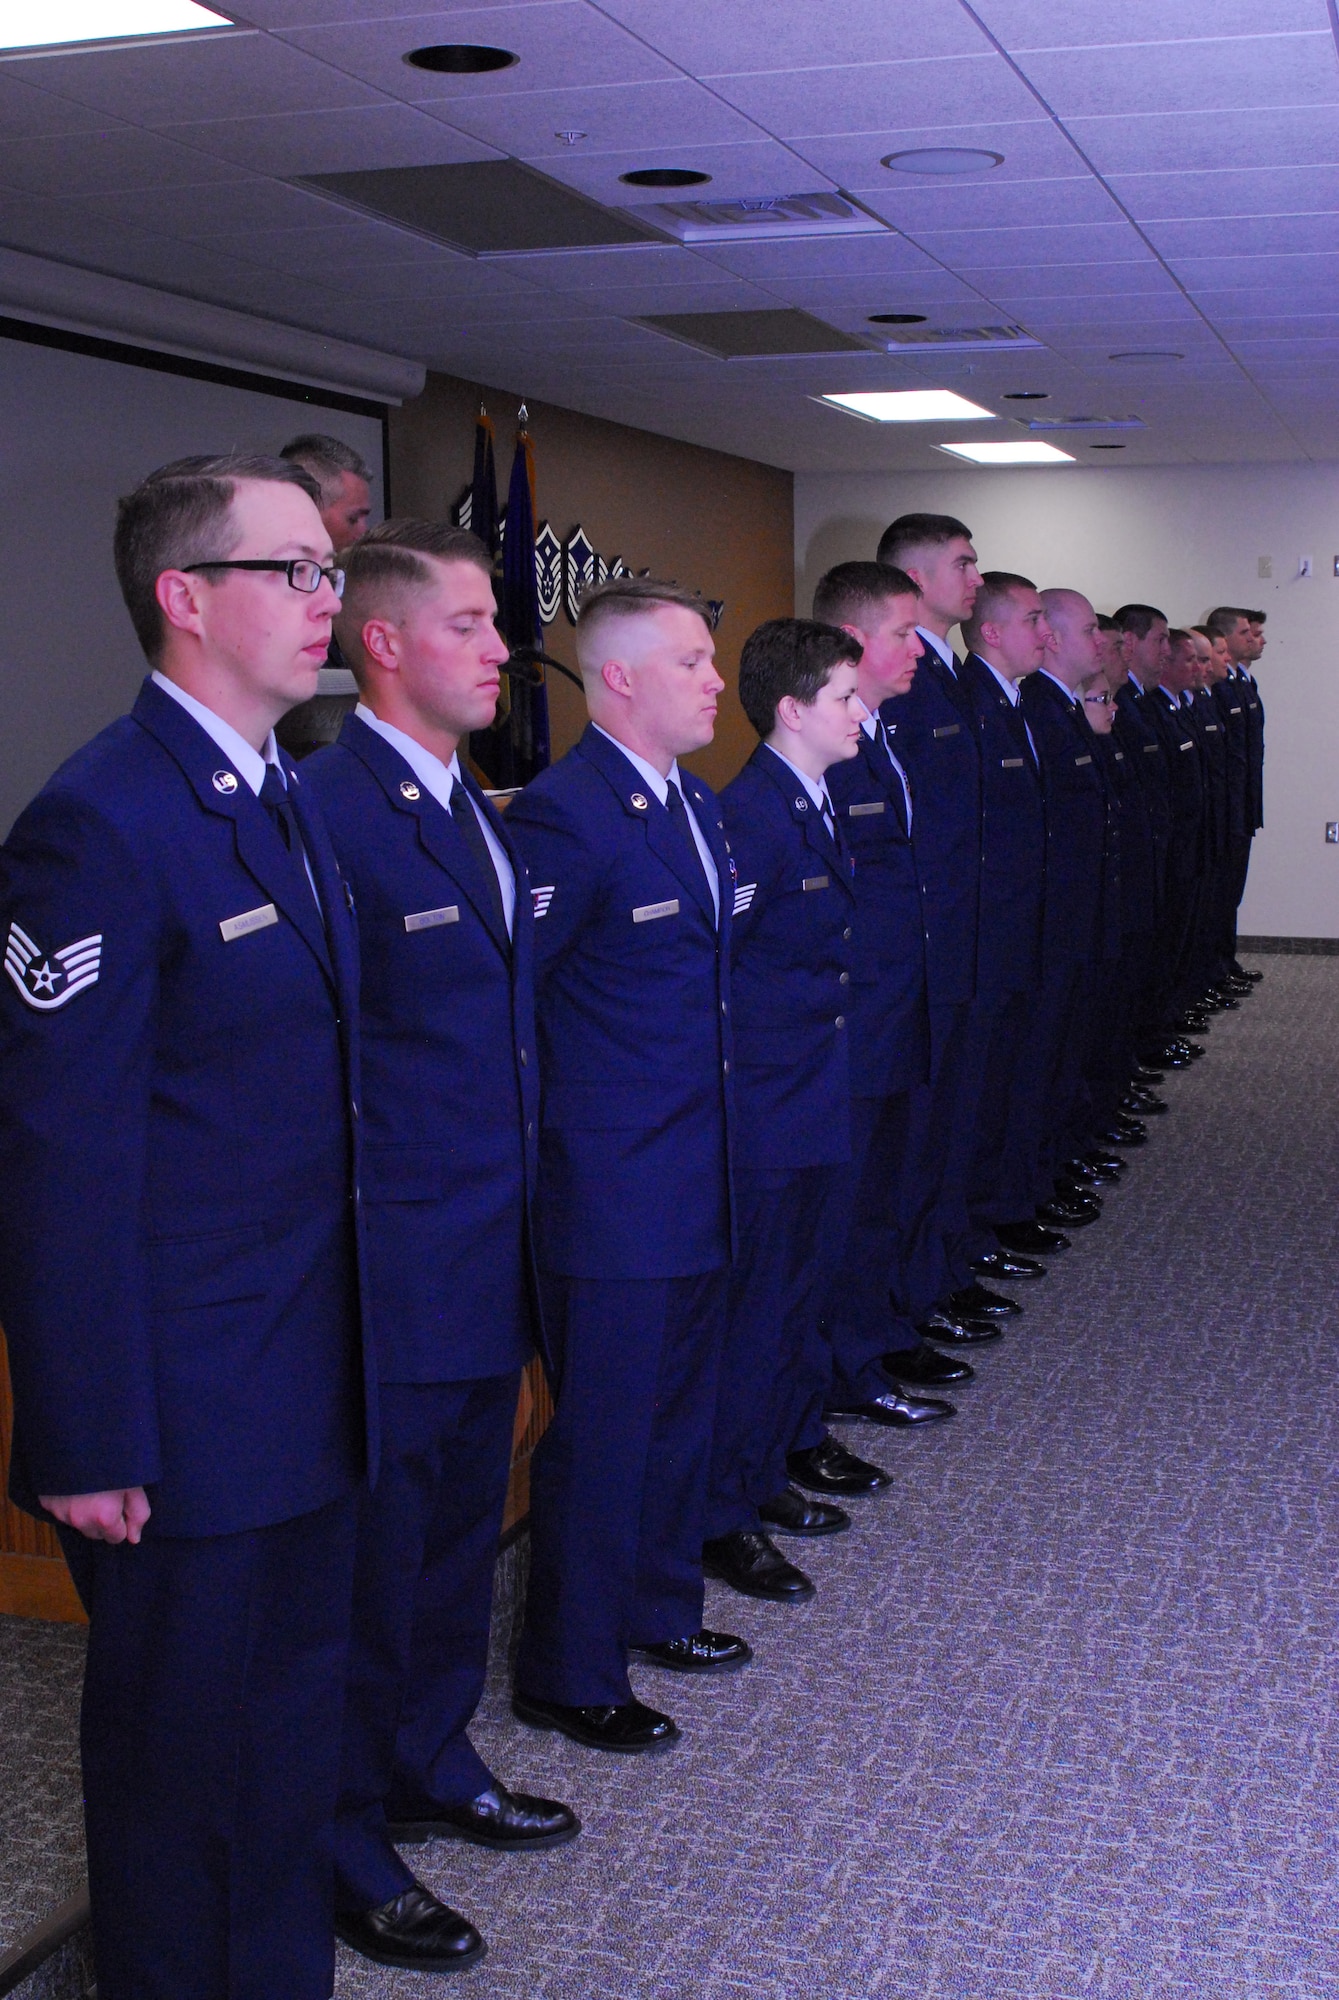 Seventeen Vigilantes of the Montana Air National Guard stand at attention to be recognized for their recent promotion to staff sergeant in the Larson room June 4, 2016. These members have left the rank of senior airmen and will take on supervisory duties with their new rank.  (U.S. Air National Guard photo by Staff Sgt. Lindsey Soulsby/Released)